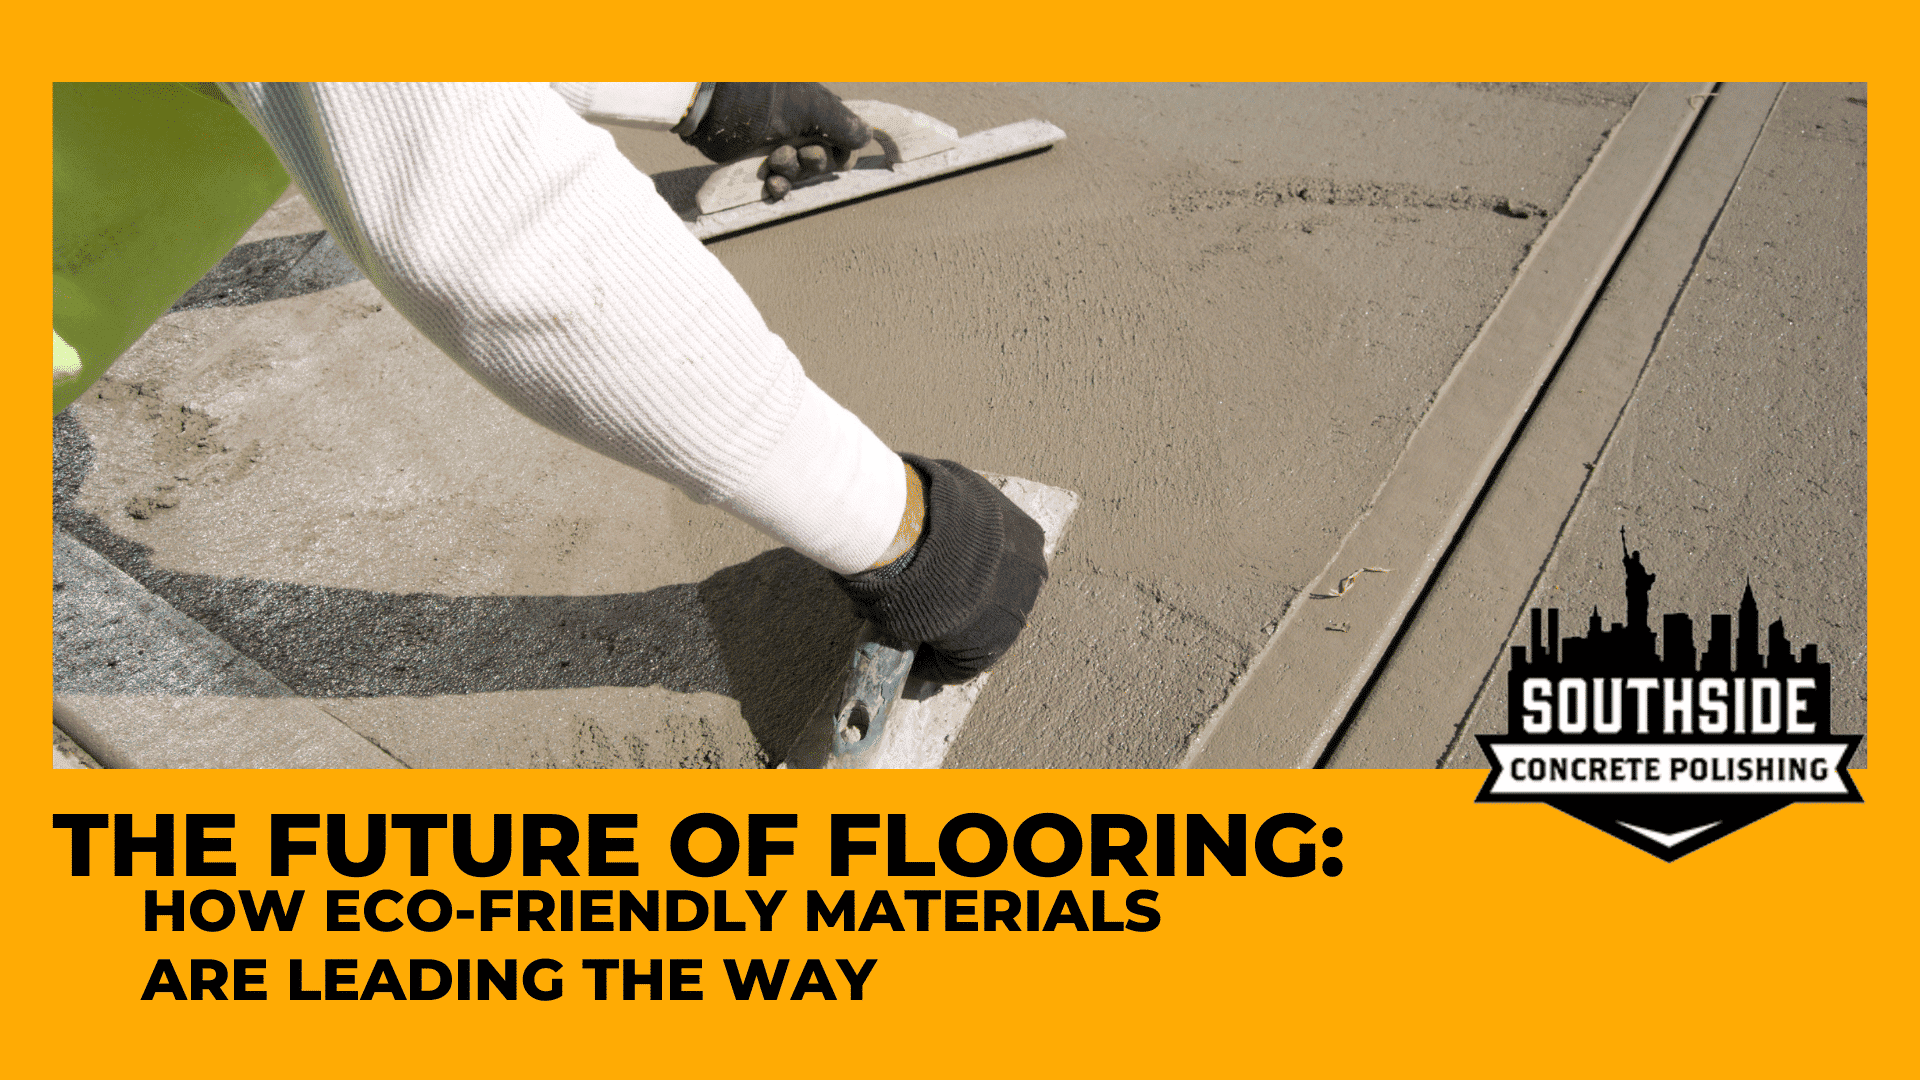 The Future of Flooring: How Eco-Friendly Materials are Leading the Way 6